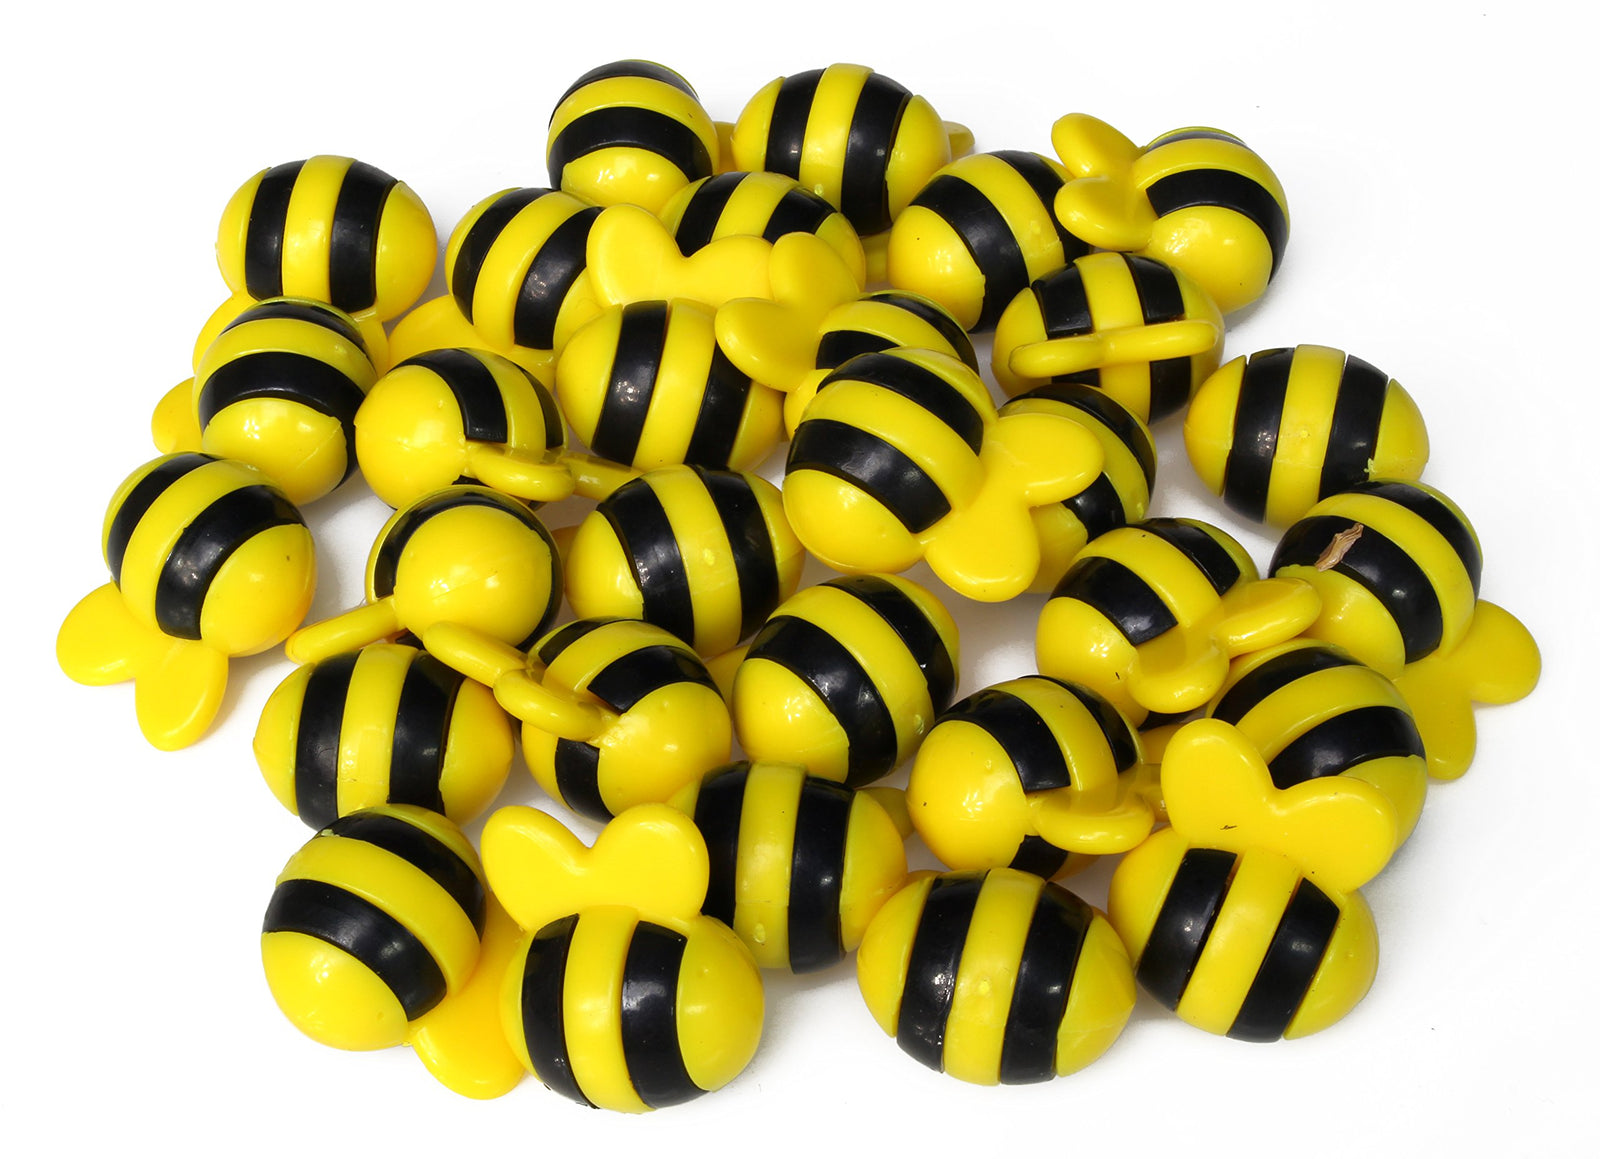 Game Zone Honey Bee Tree Game – Please Don’t Wake the Bees – 2 to 4 Players, Ages 3 and Up